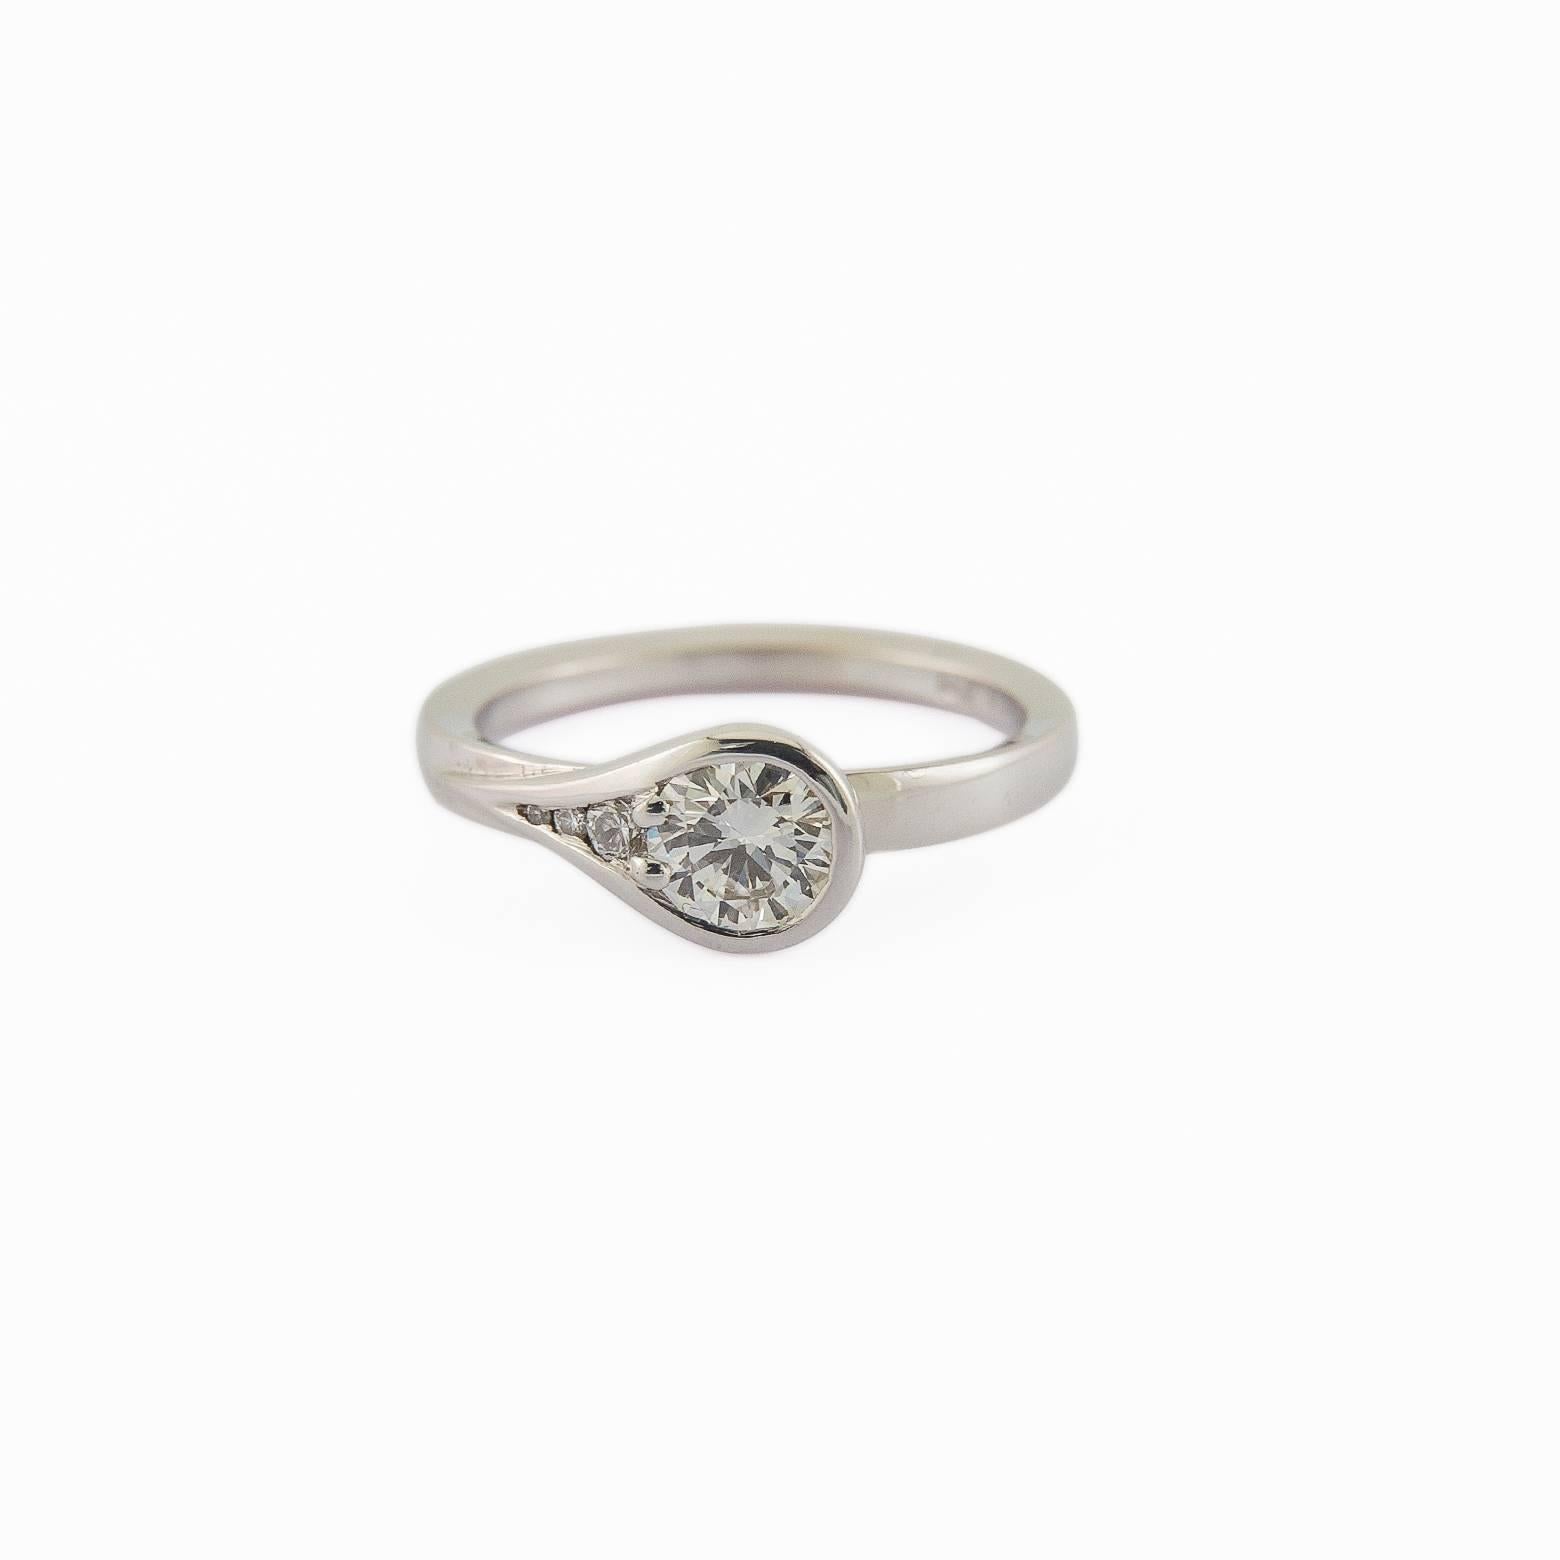 This stunning diamond ring adds up 0.61 carats and is set in 14K white gold. The style is clean and chic creating a modern tear drop shape with 4 diamonds in total. The clarity and color of the diamonds are VS2, white and bright. Comfortable and